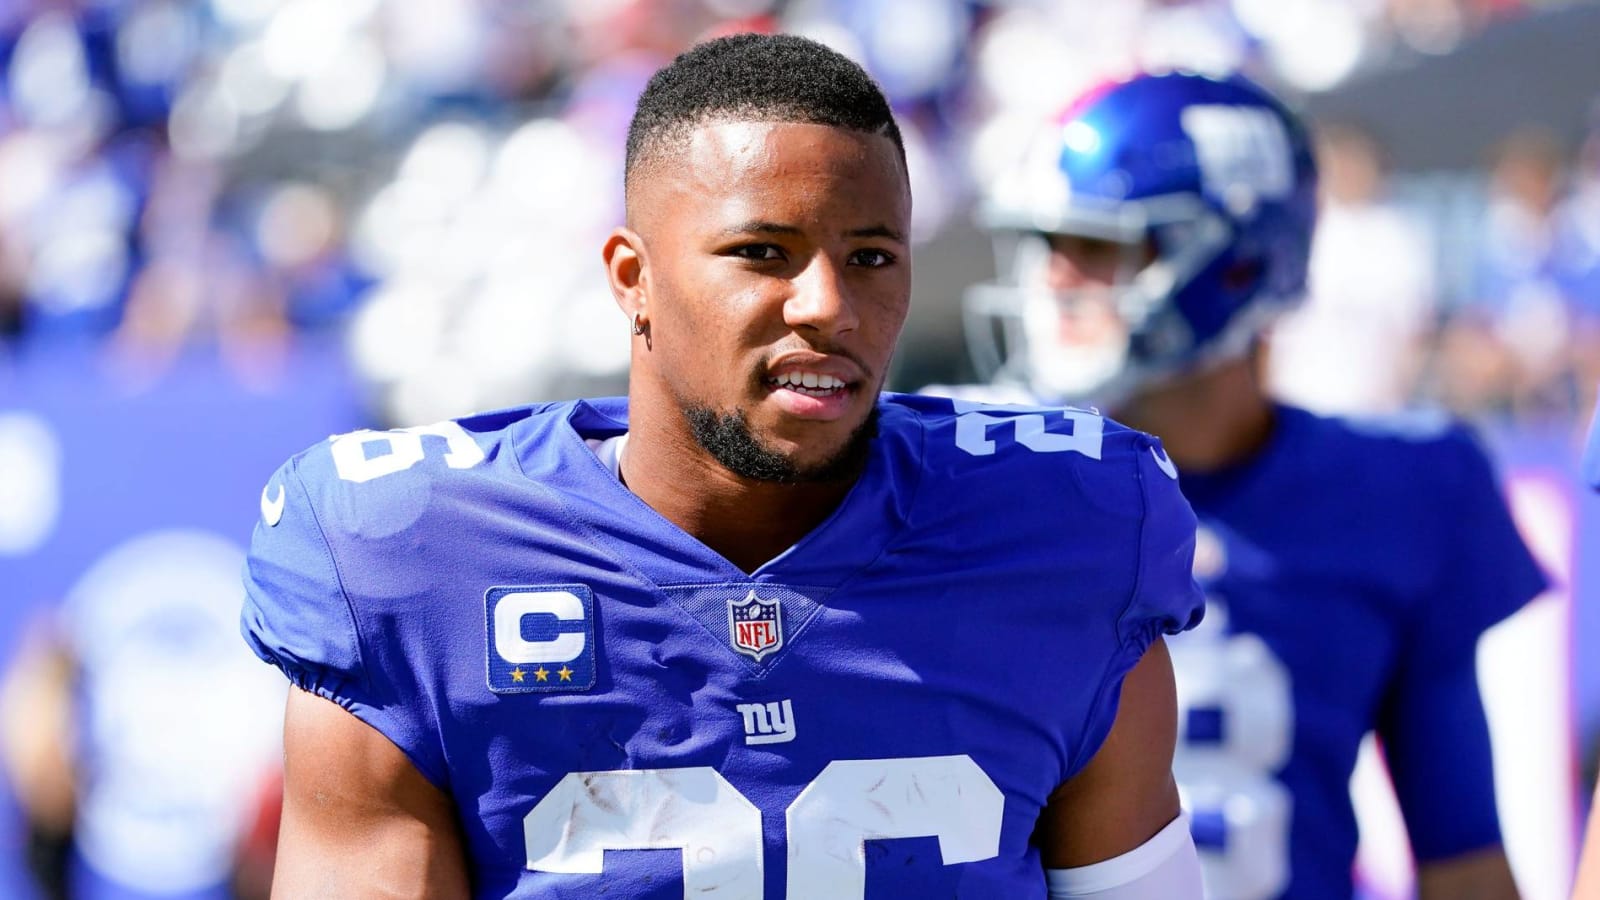 Saquon Barkley back with Giants after false positive COVID test